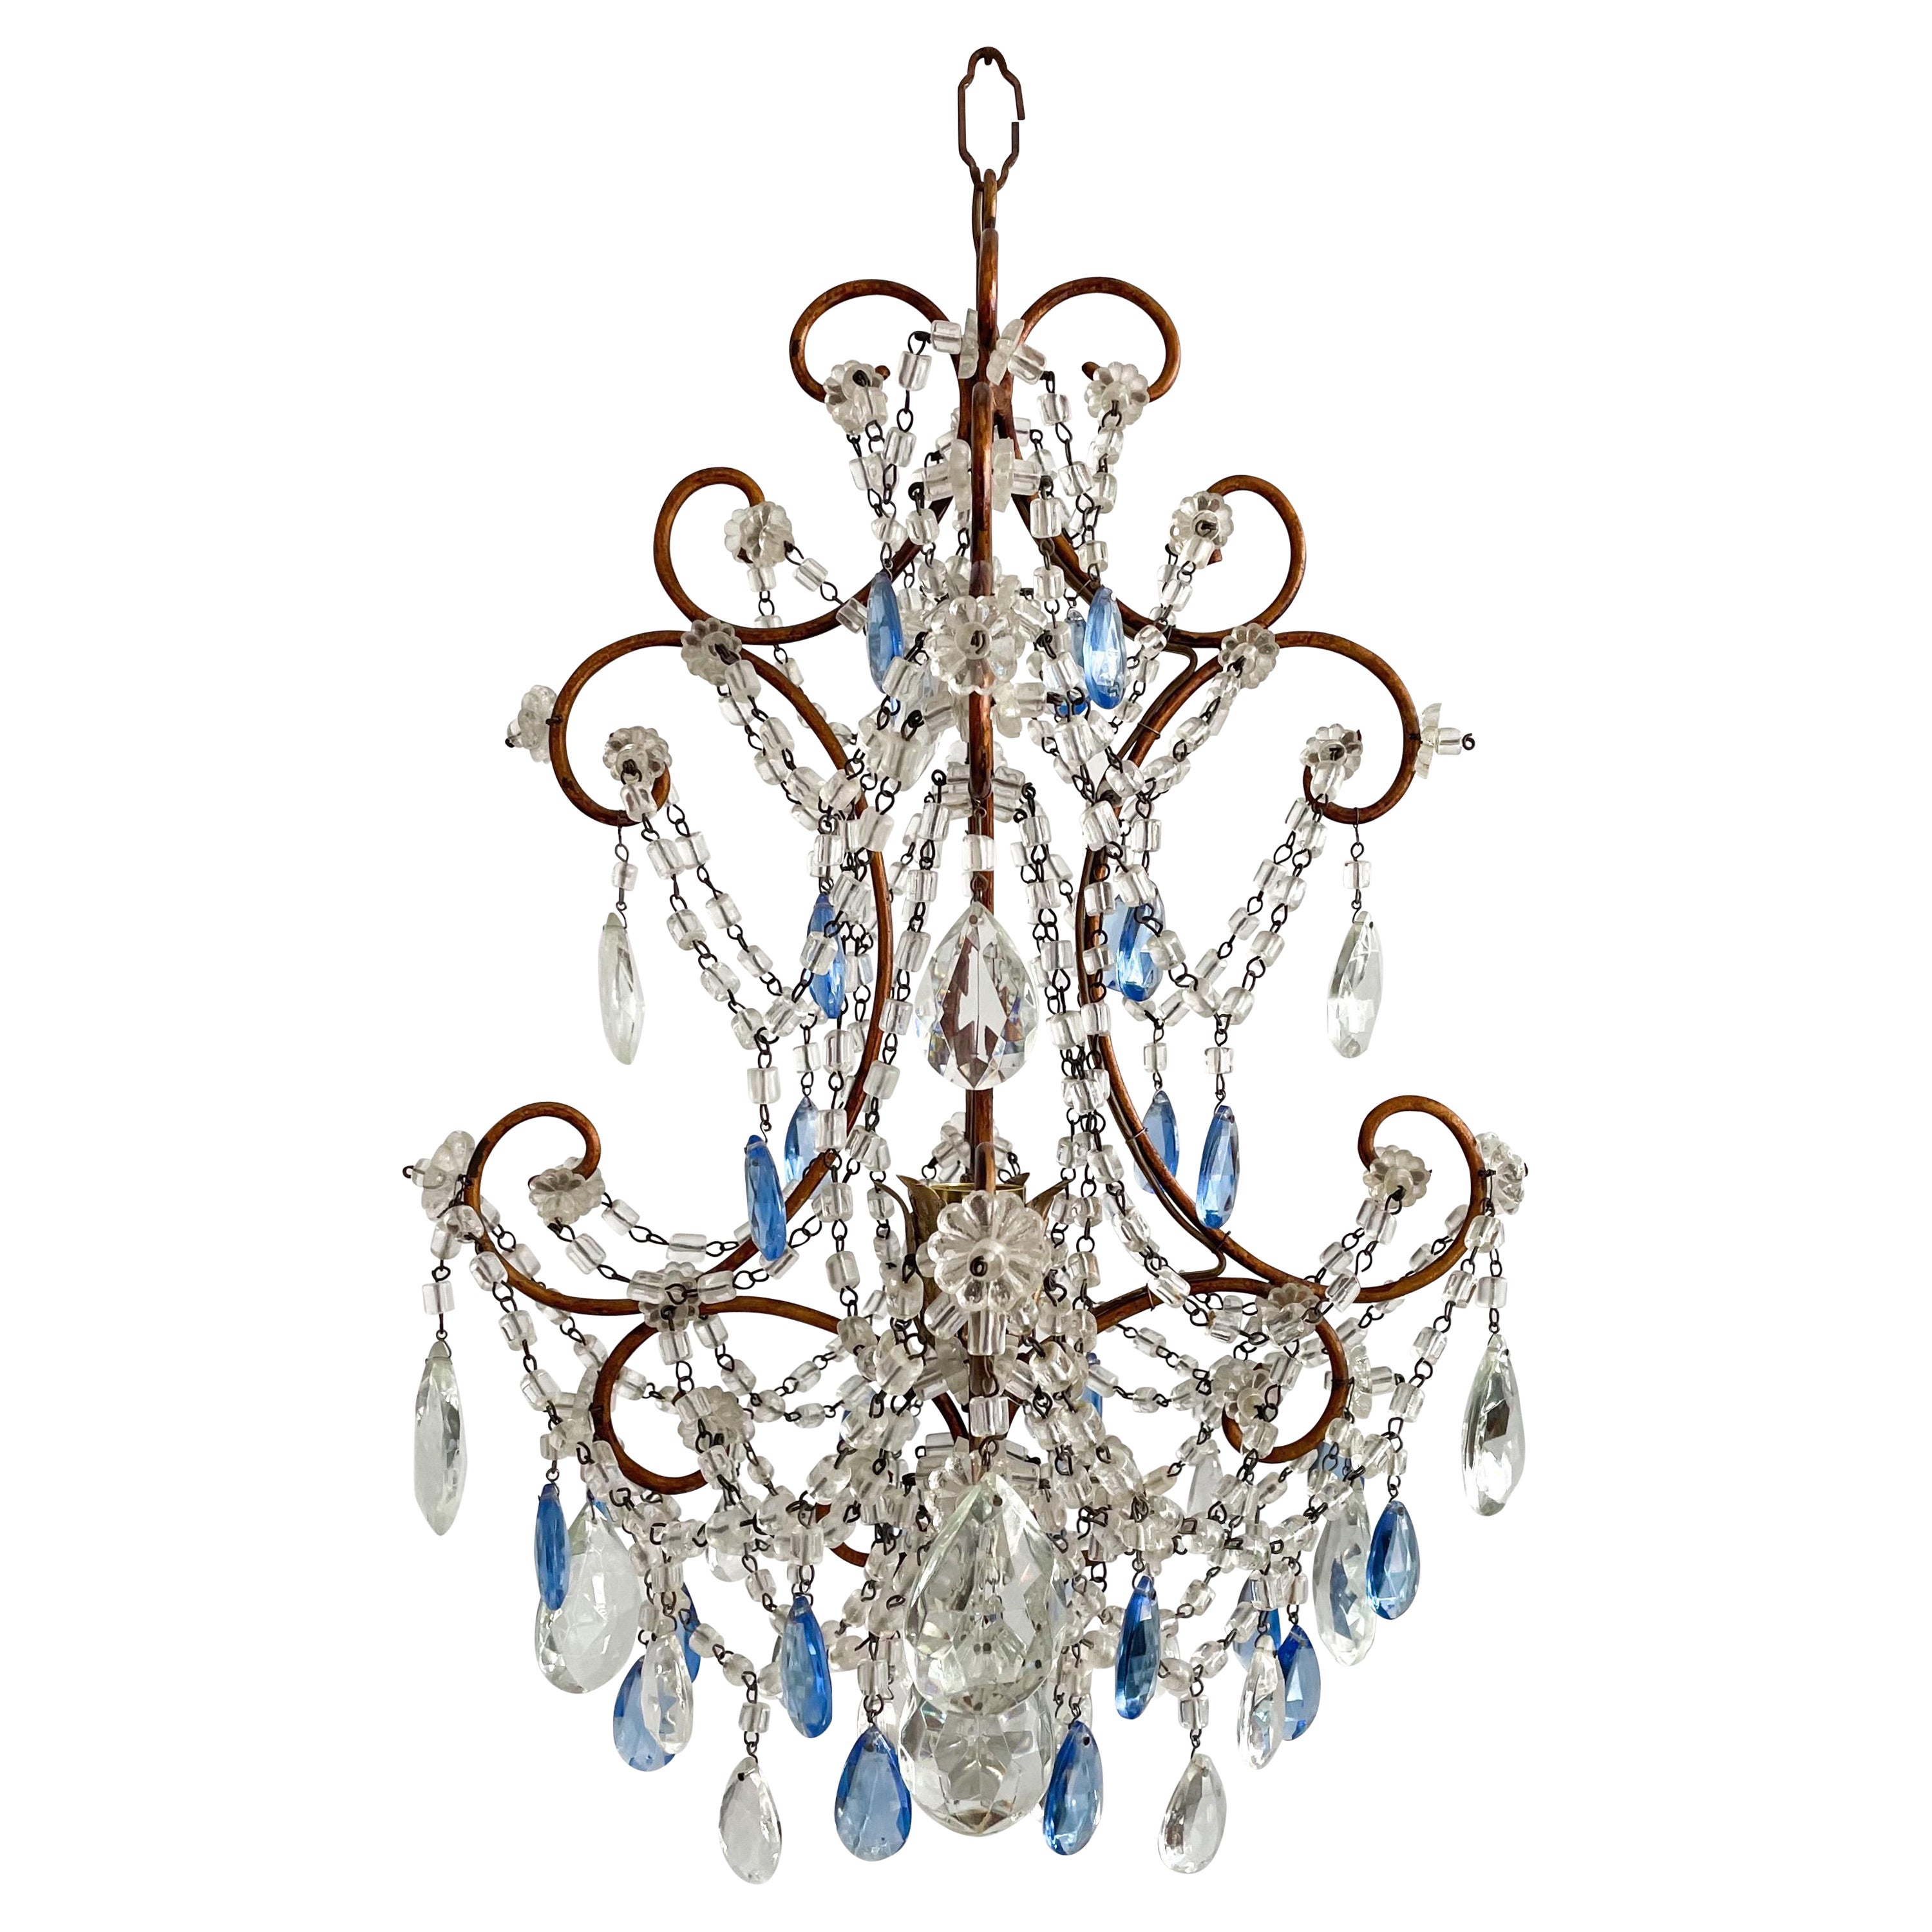 Italian Petite-Scale Beaded Chandelier with Blue Drops